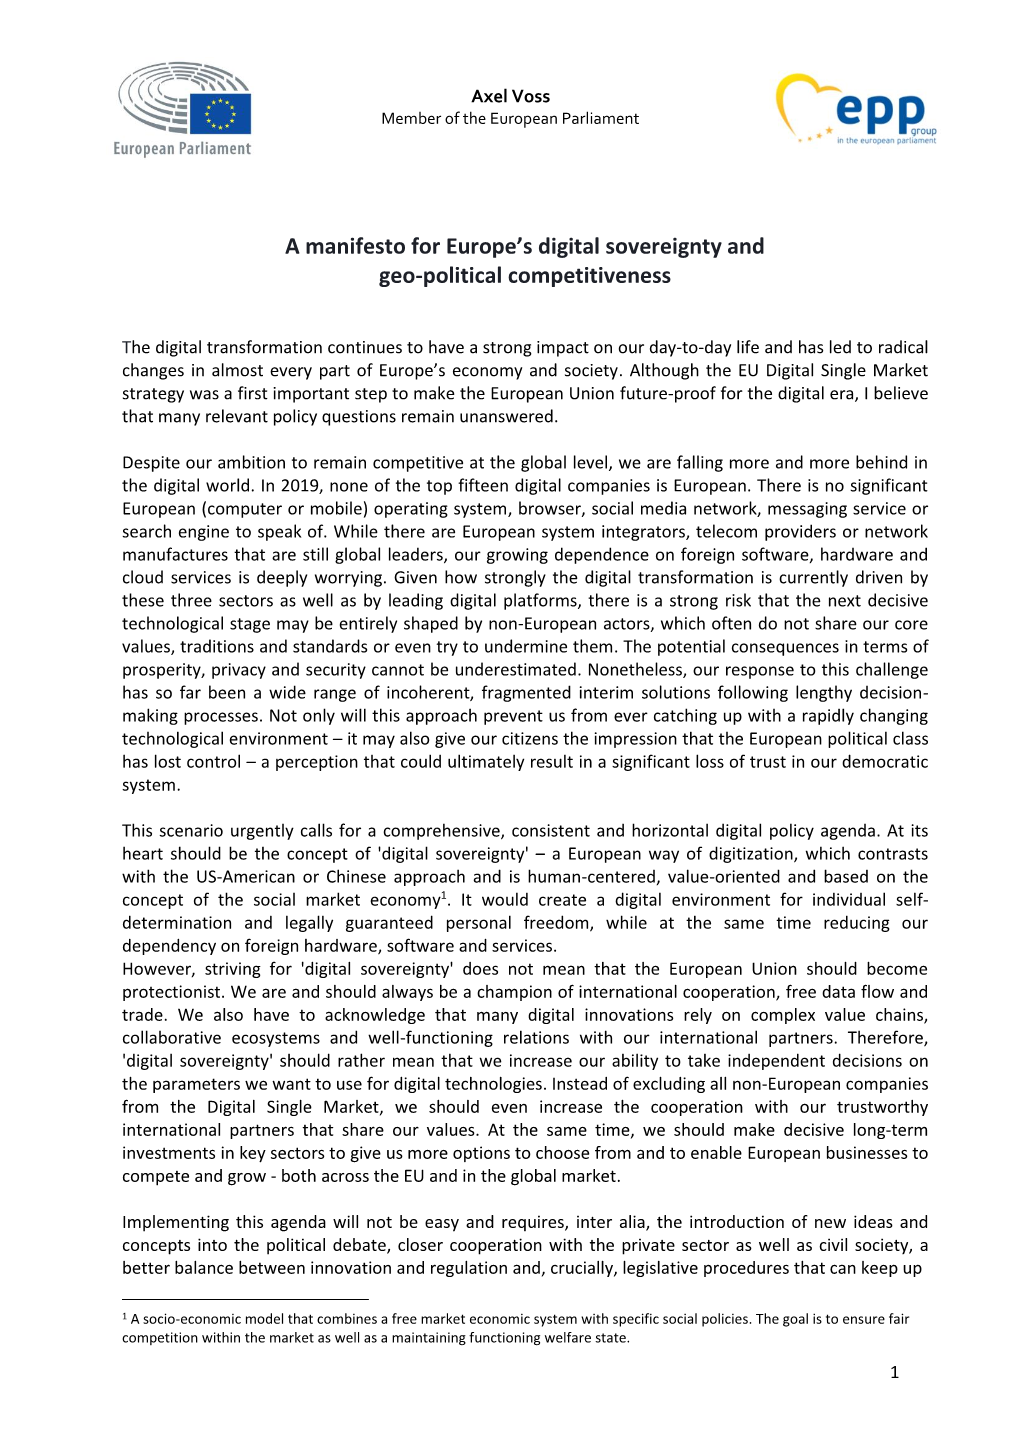 A Manifesto for Europe's Digital Sovereignty and Geo